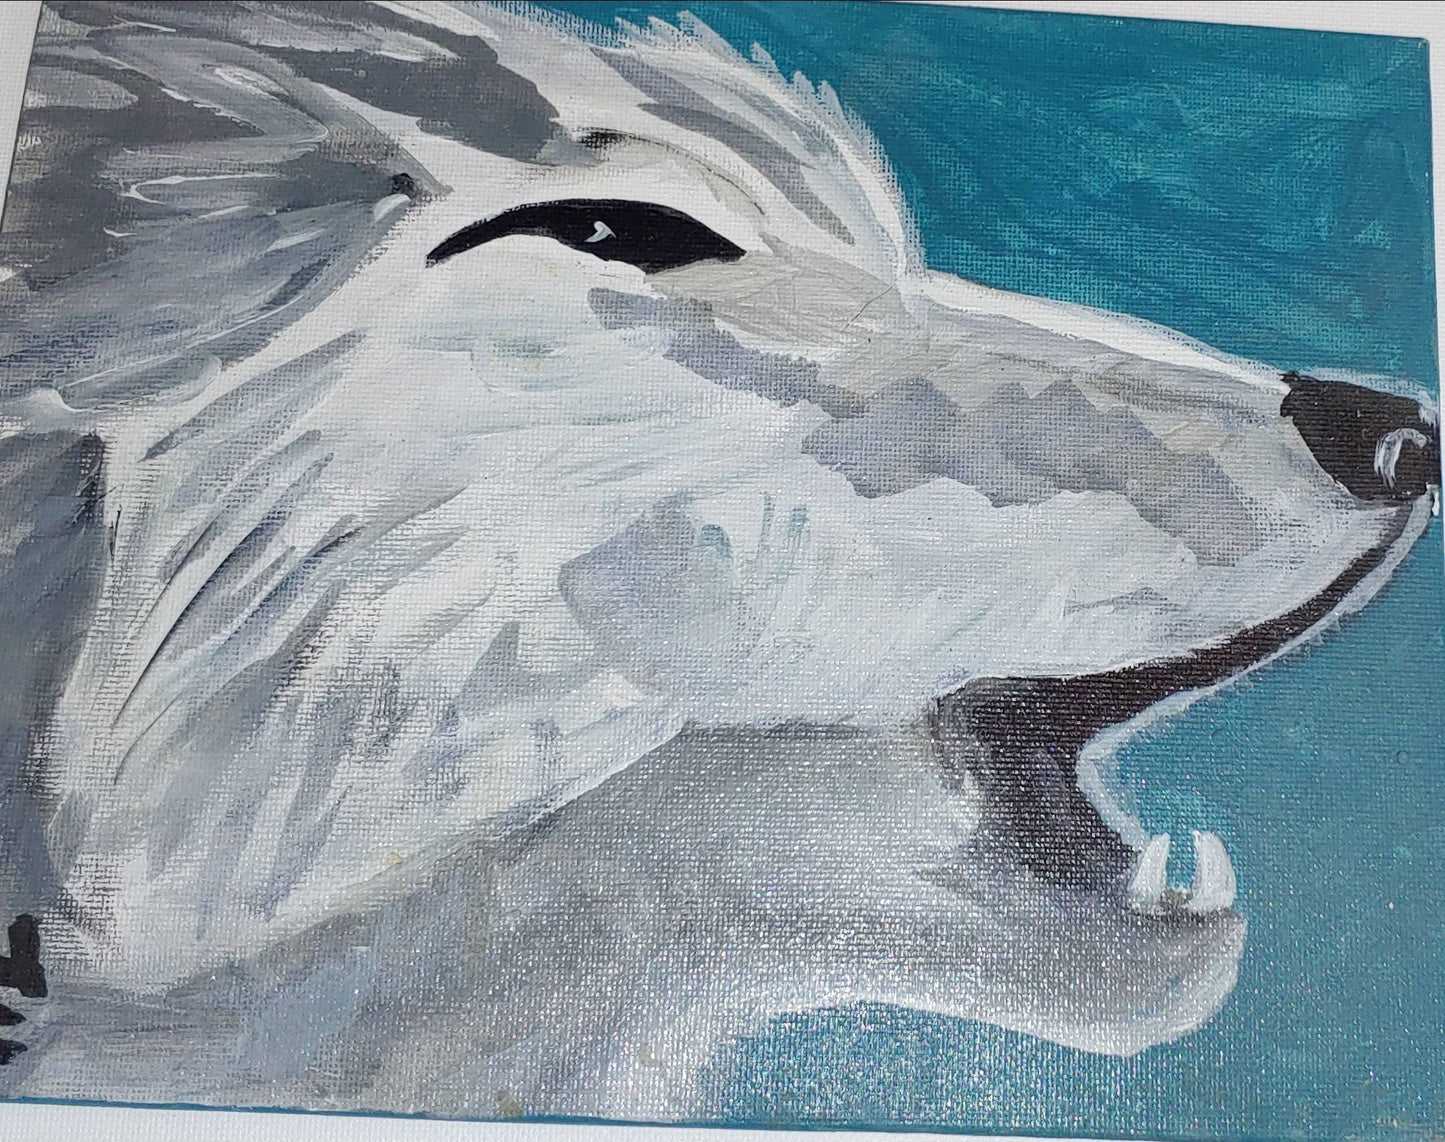 big sale Was $25 now $15 ....howling wolf painting 8 x 10 inches on canvas